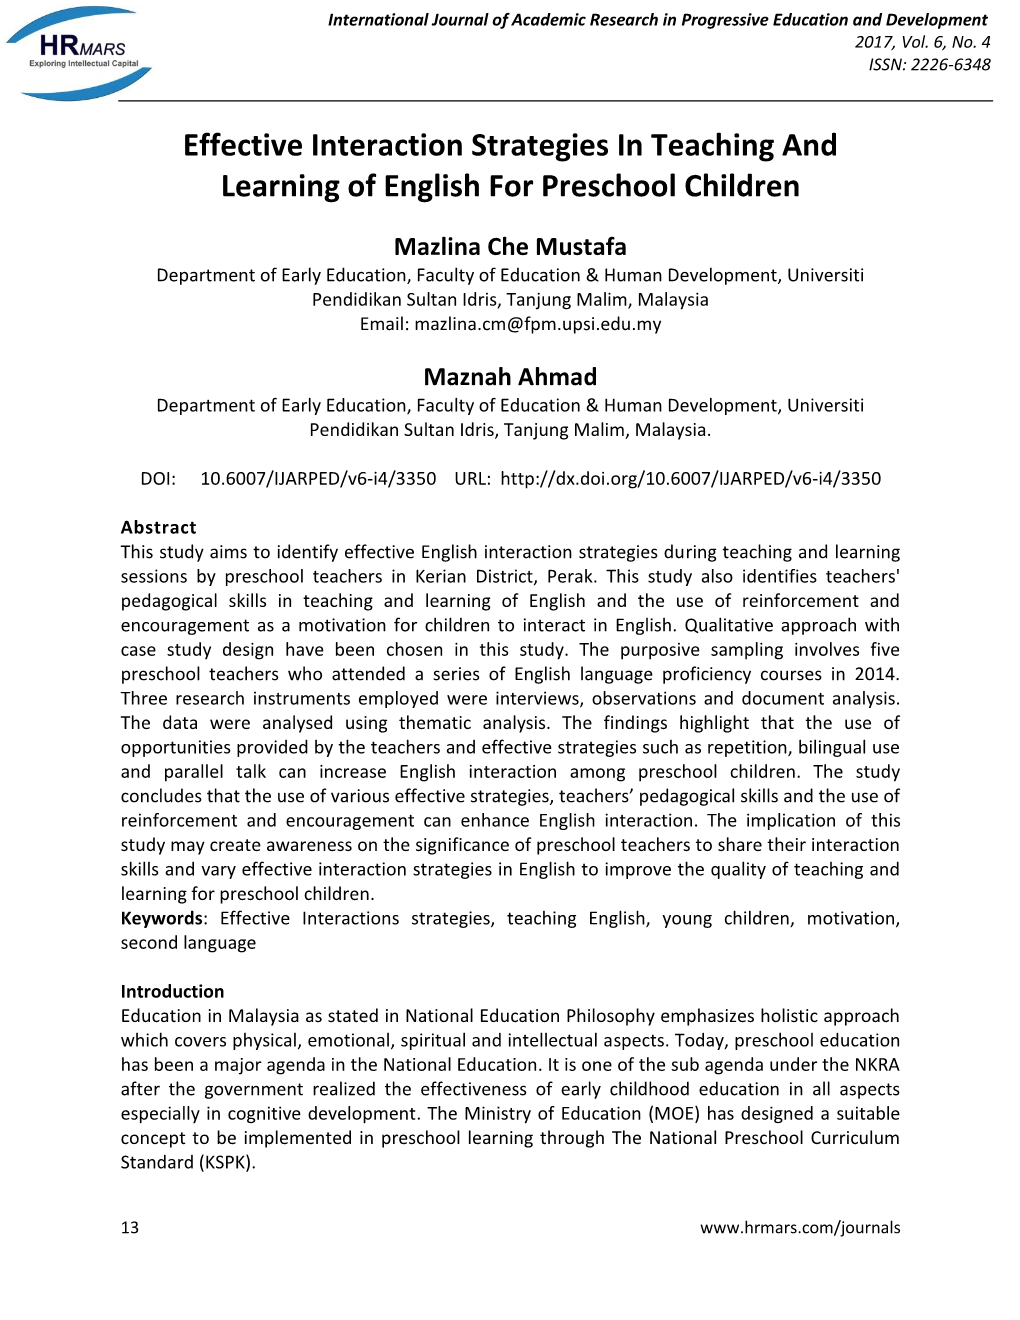 Effective Interaction Strategies in Teaching and Learning of English for Preschool Children